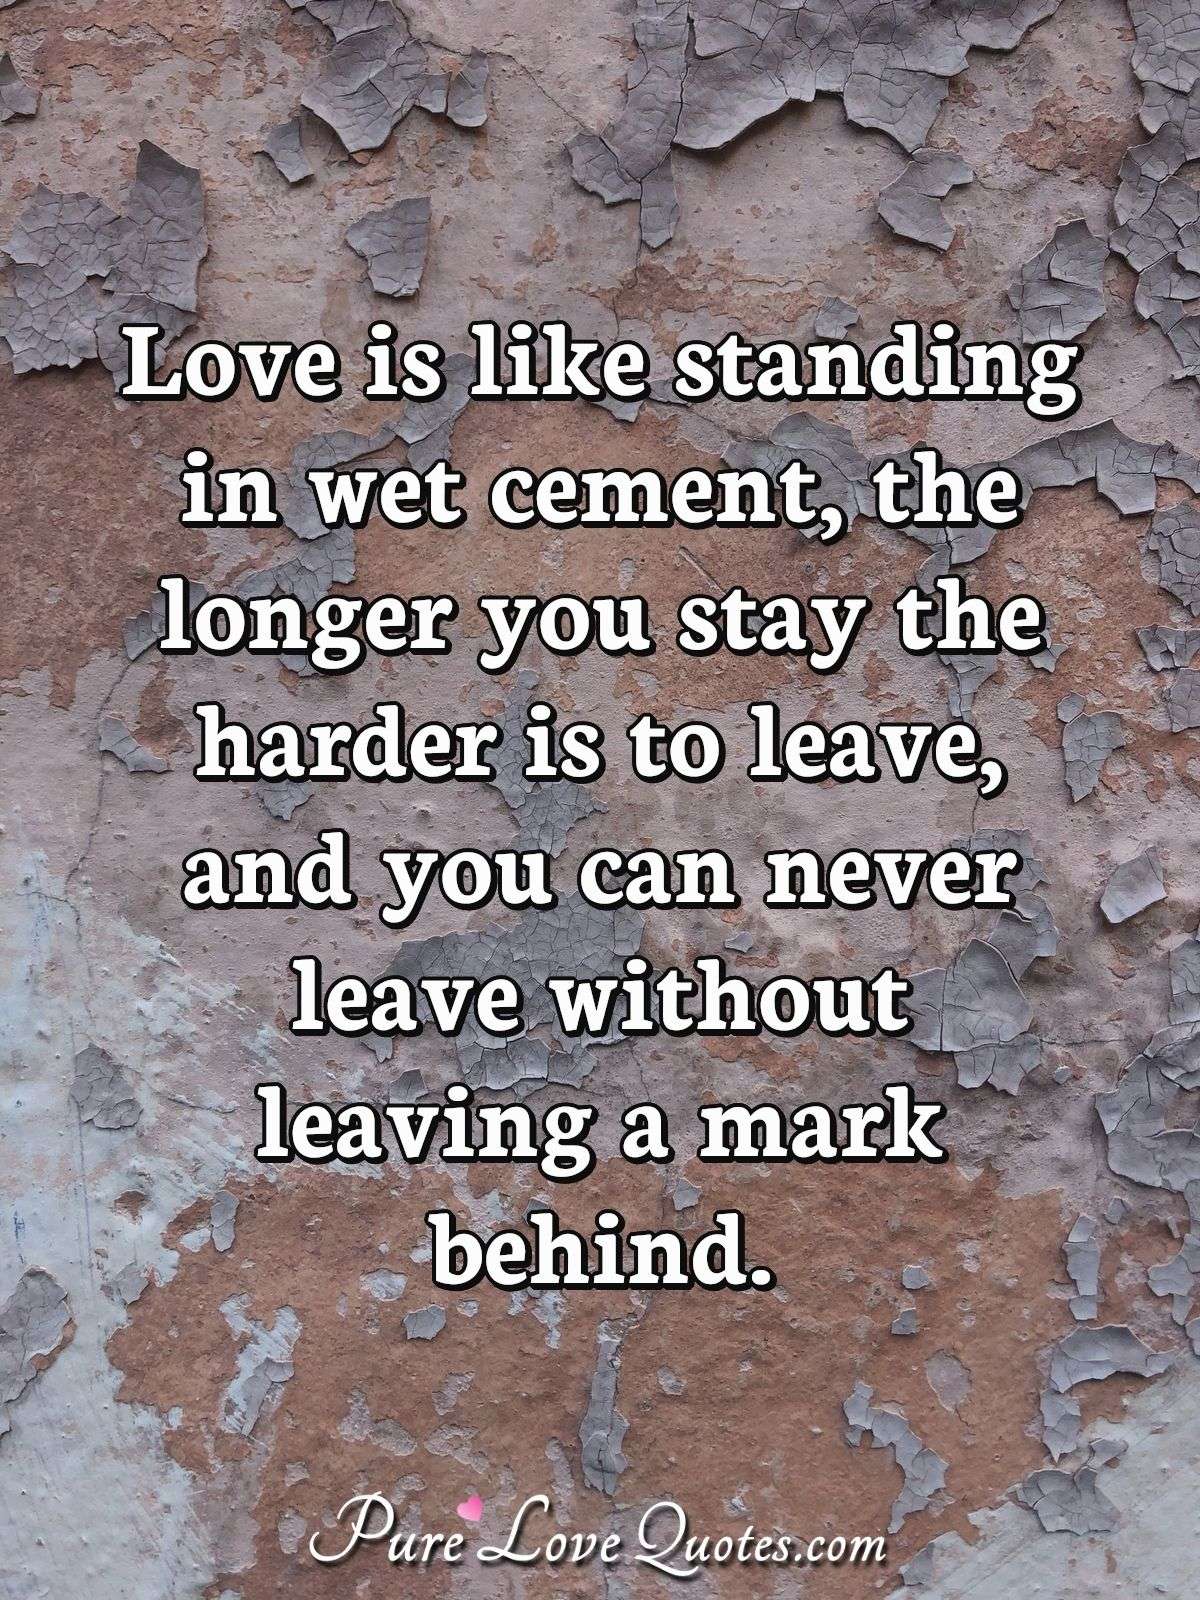 Love Is Like Standing In Wet Cement The Longer You Stay The Harder Is To Leave Purelovequotes